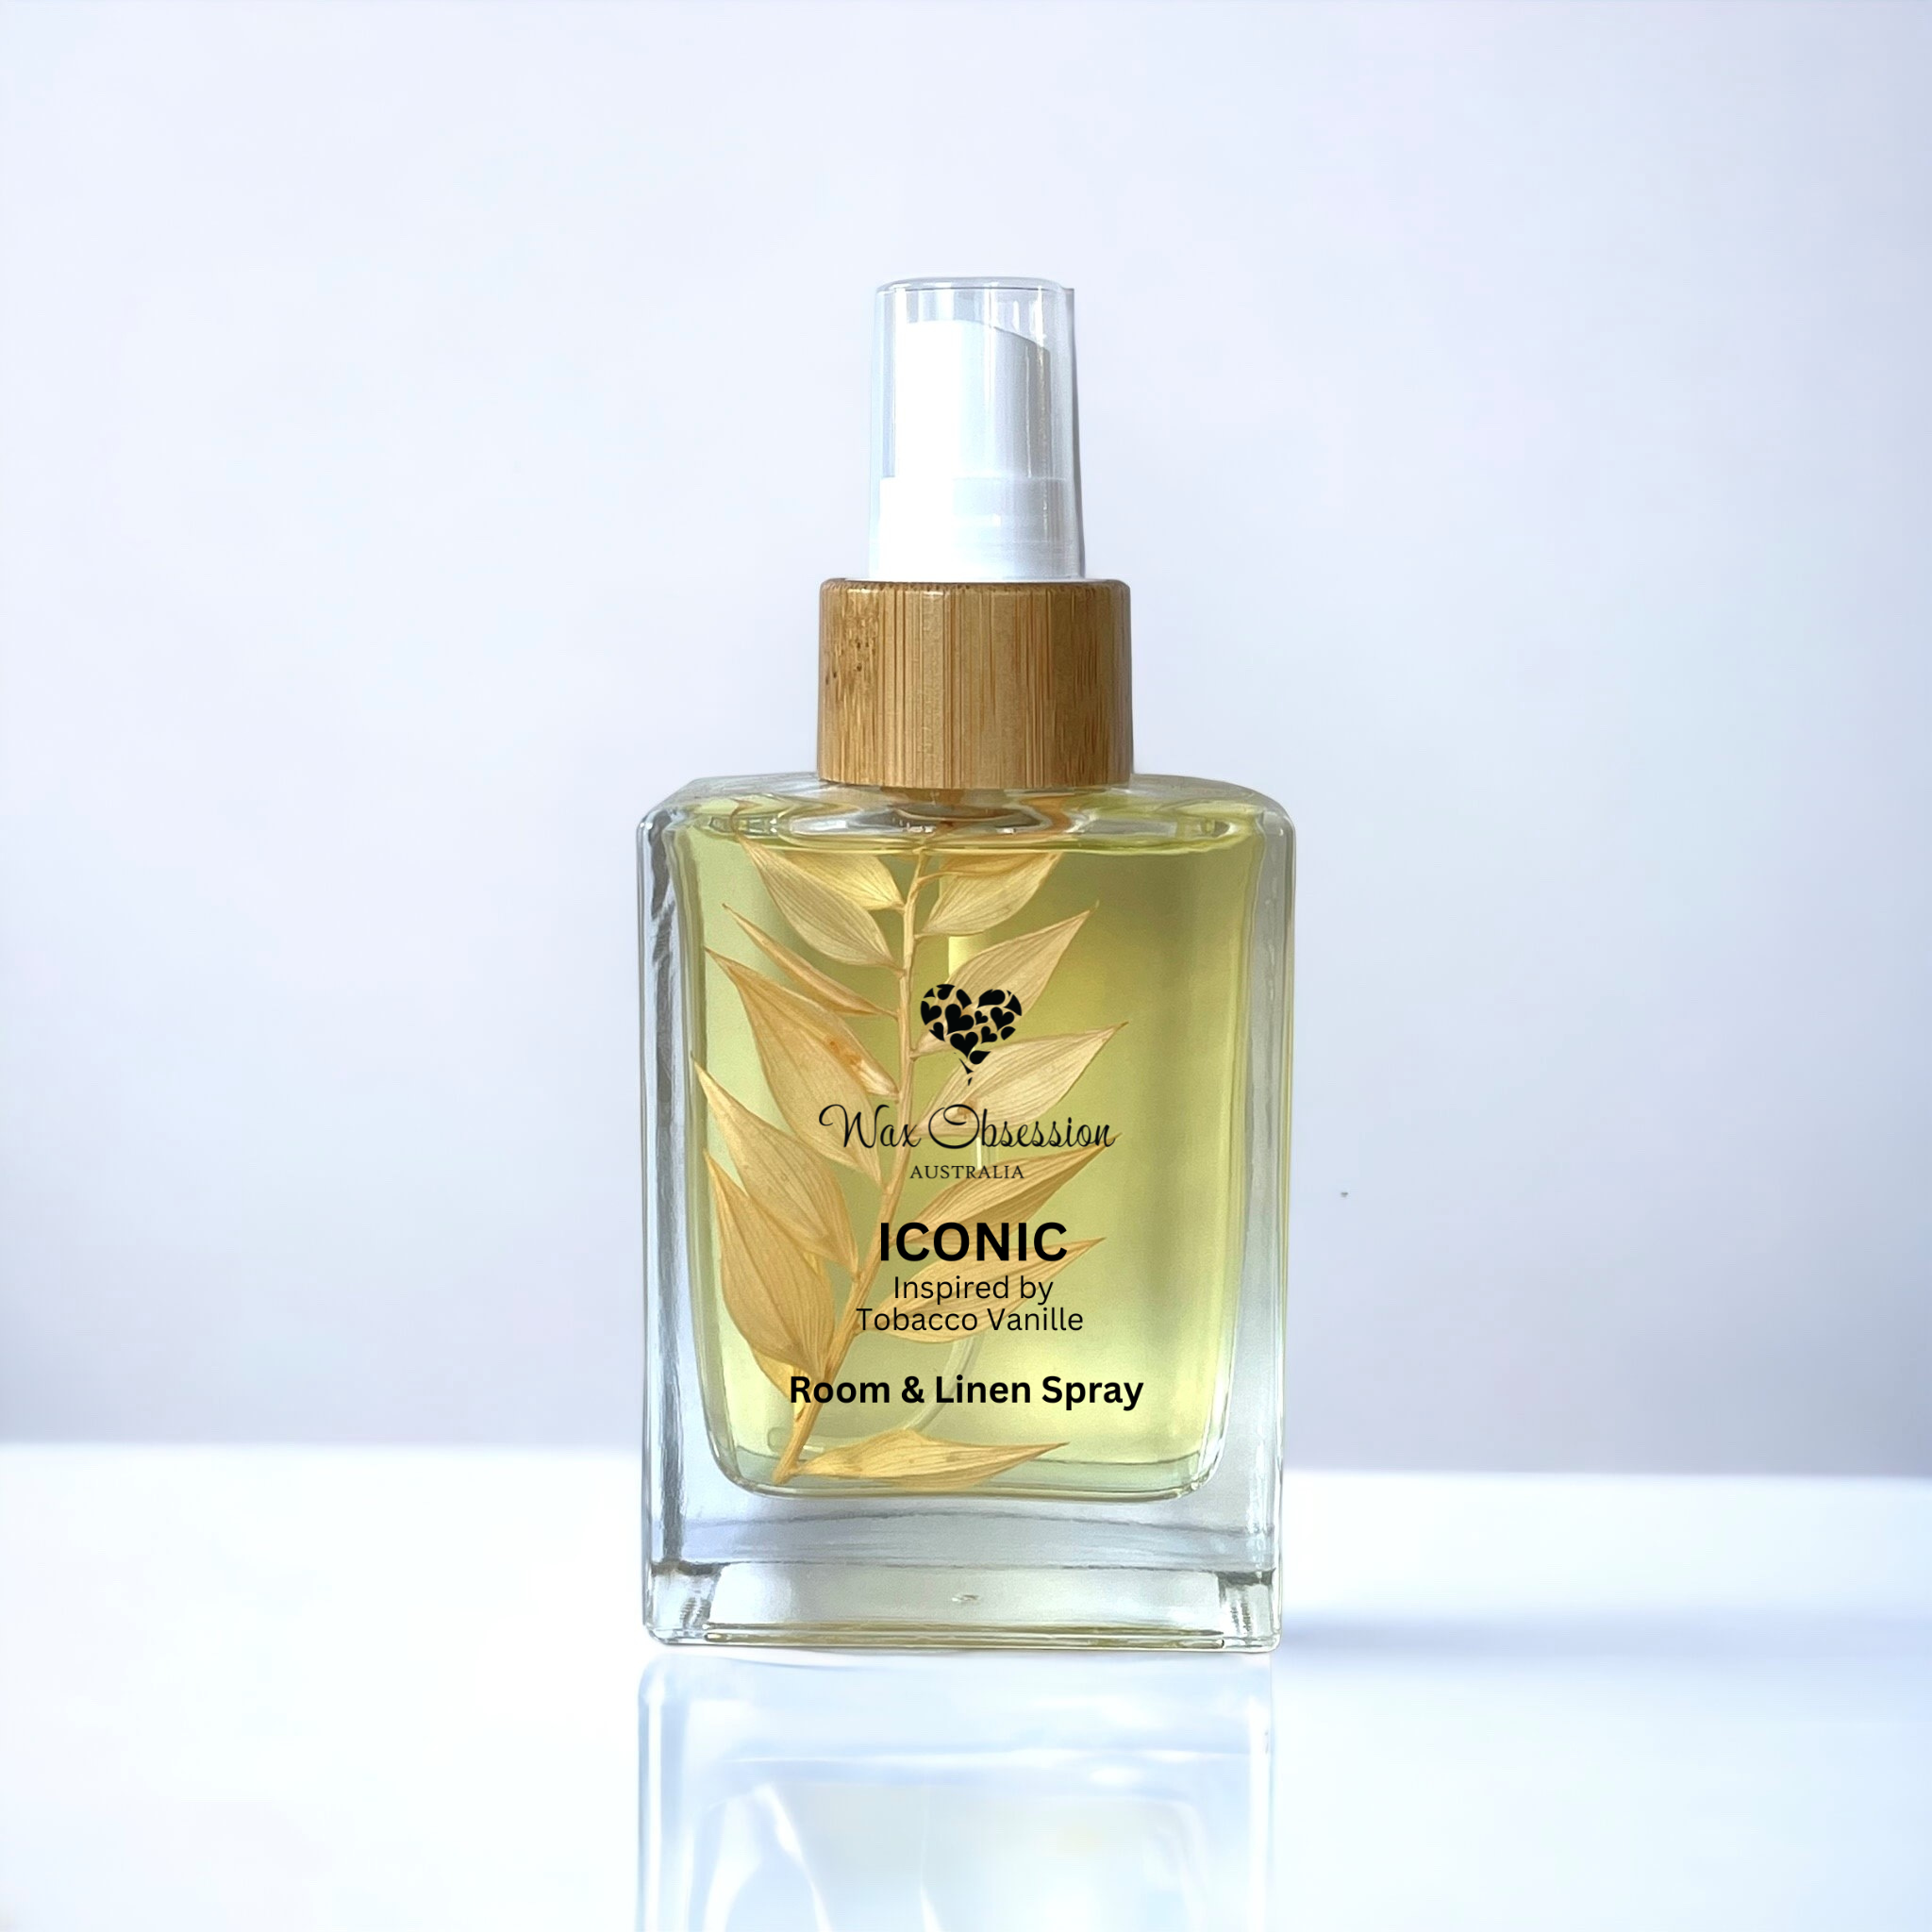 Room & Linen Spray ICONIC -  (inspired by Tobacco Vanille